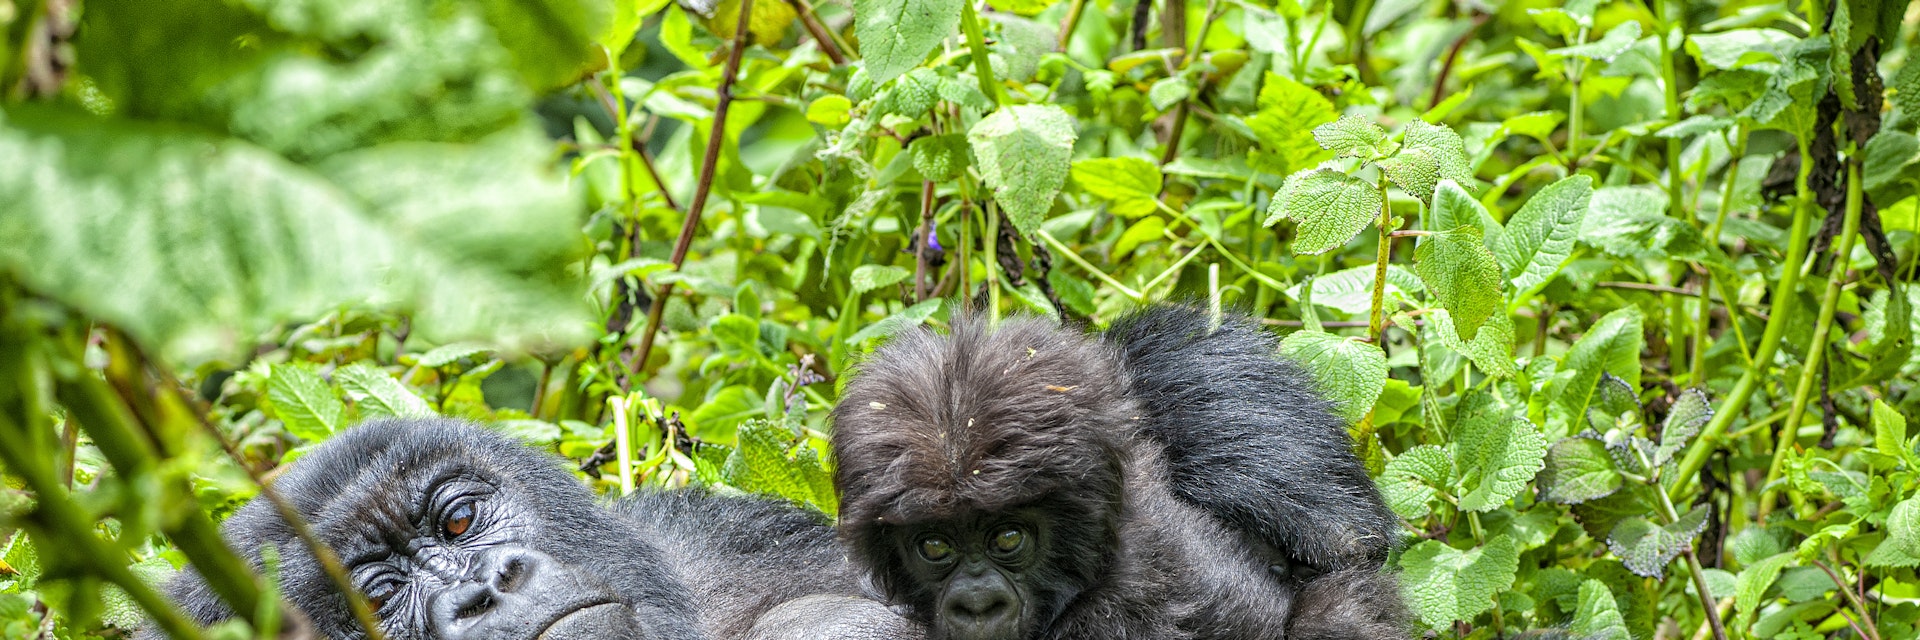 A female mountain gorilla with her young baby in Volcanoes National Park in the Virunga Mountains.
